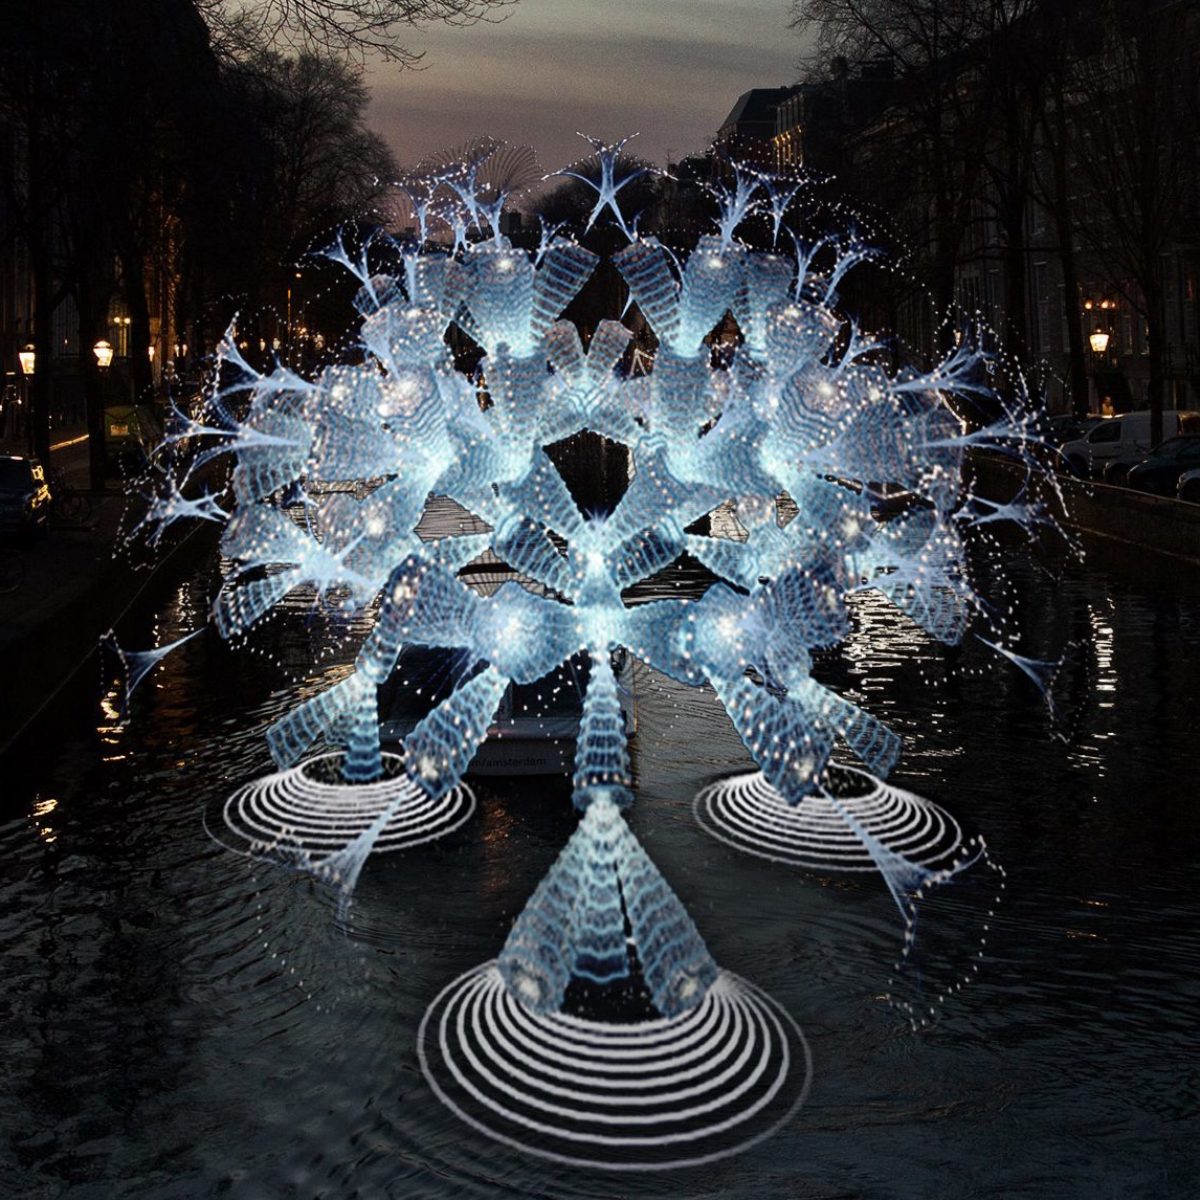 Cosmic Tree for Amsterdam Light Festival by Mamou-Mani